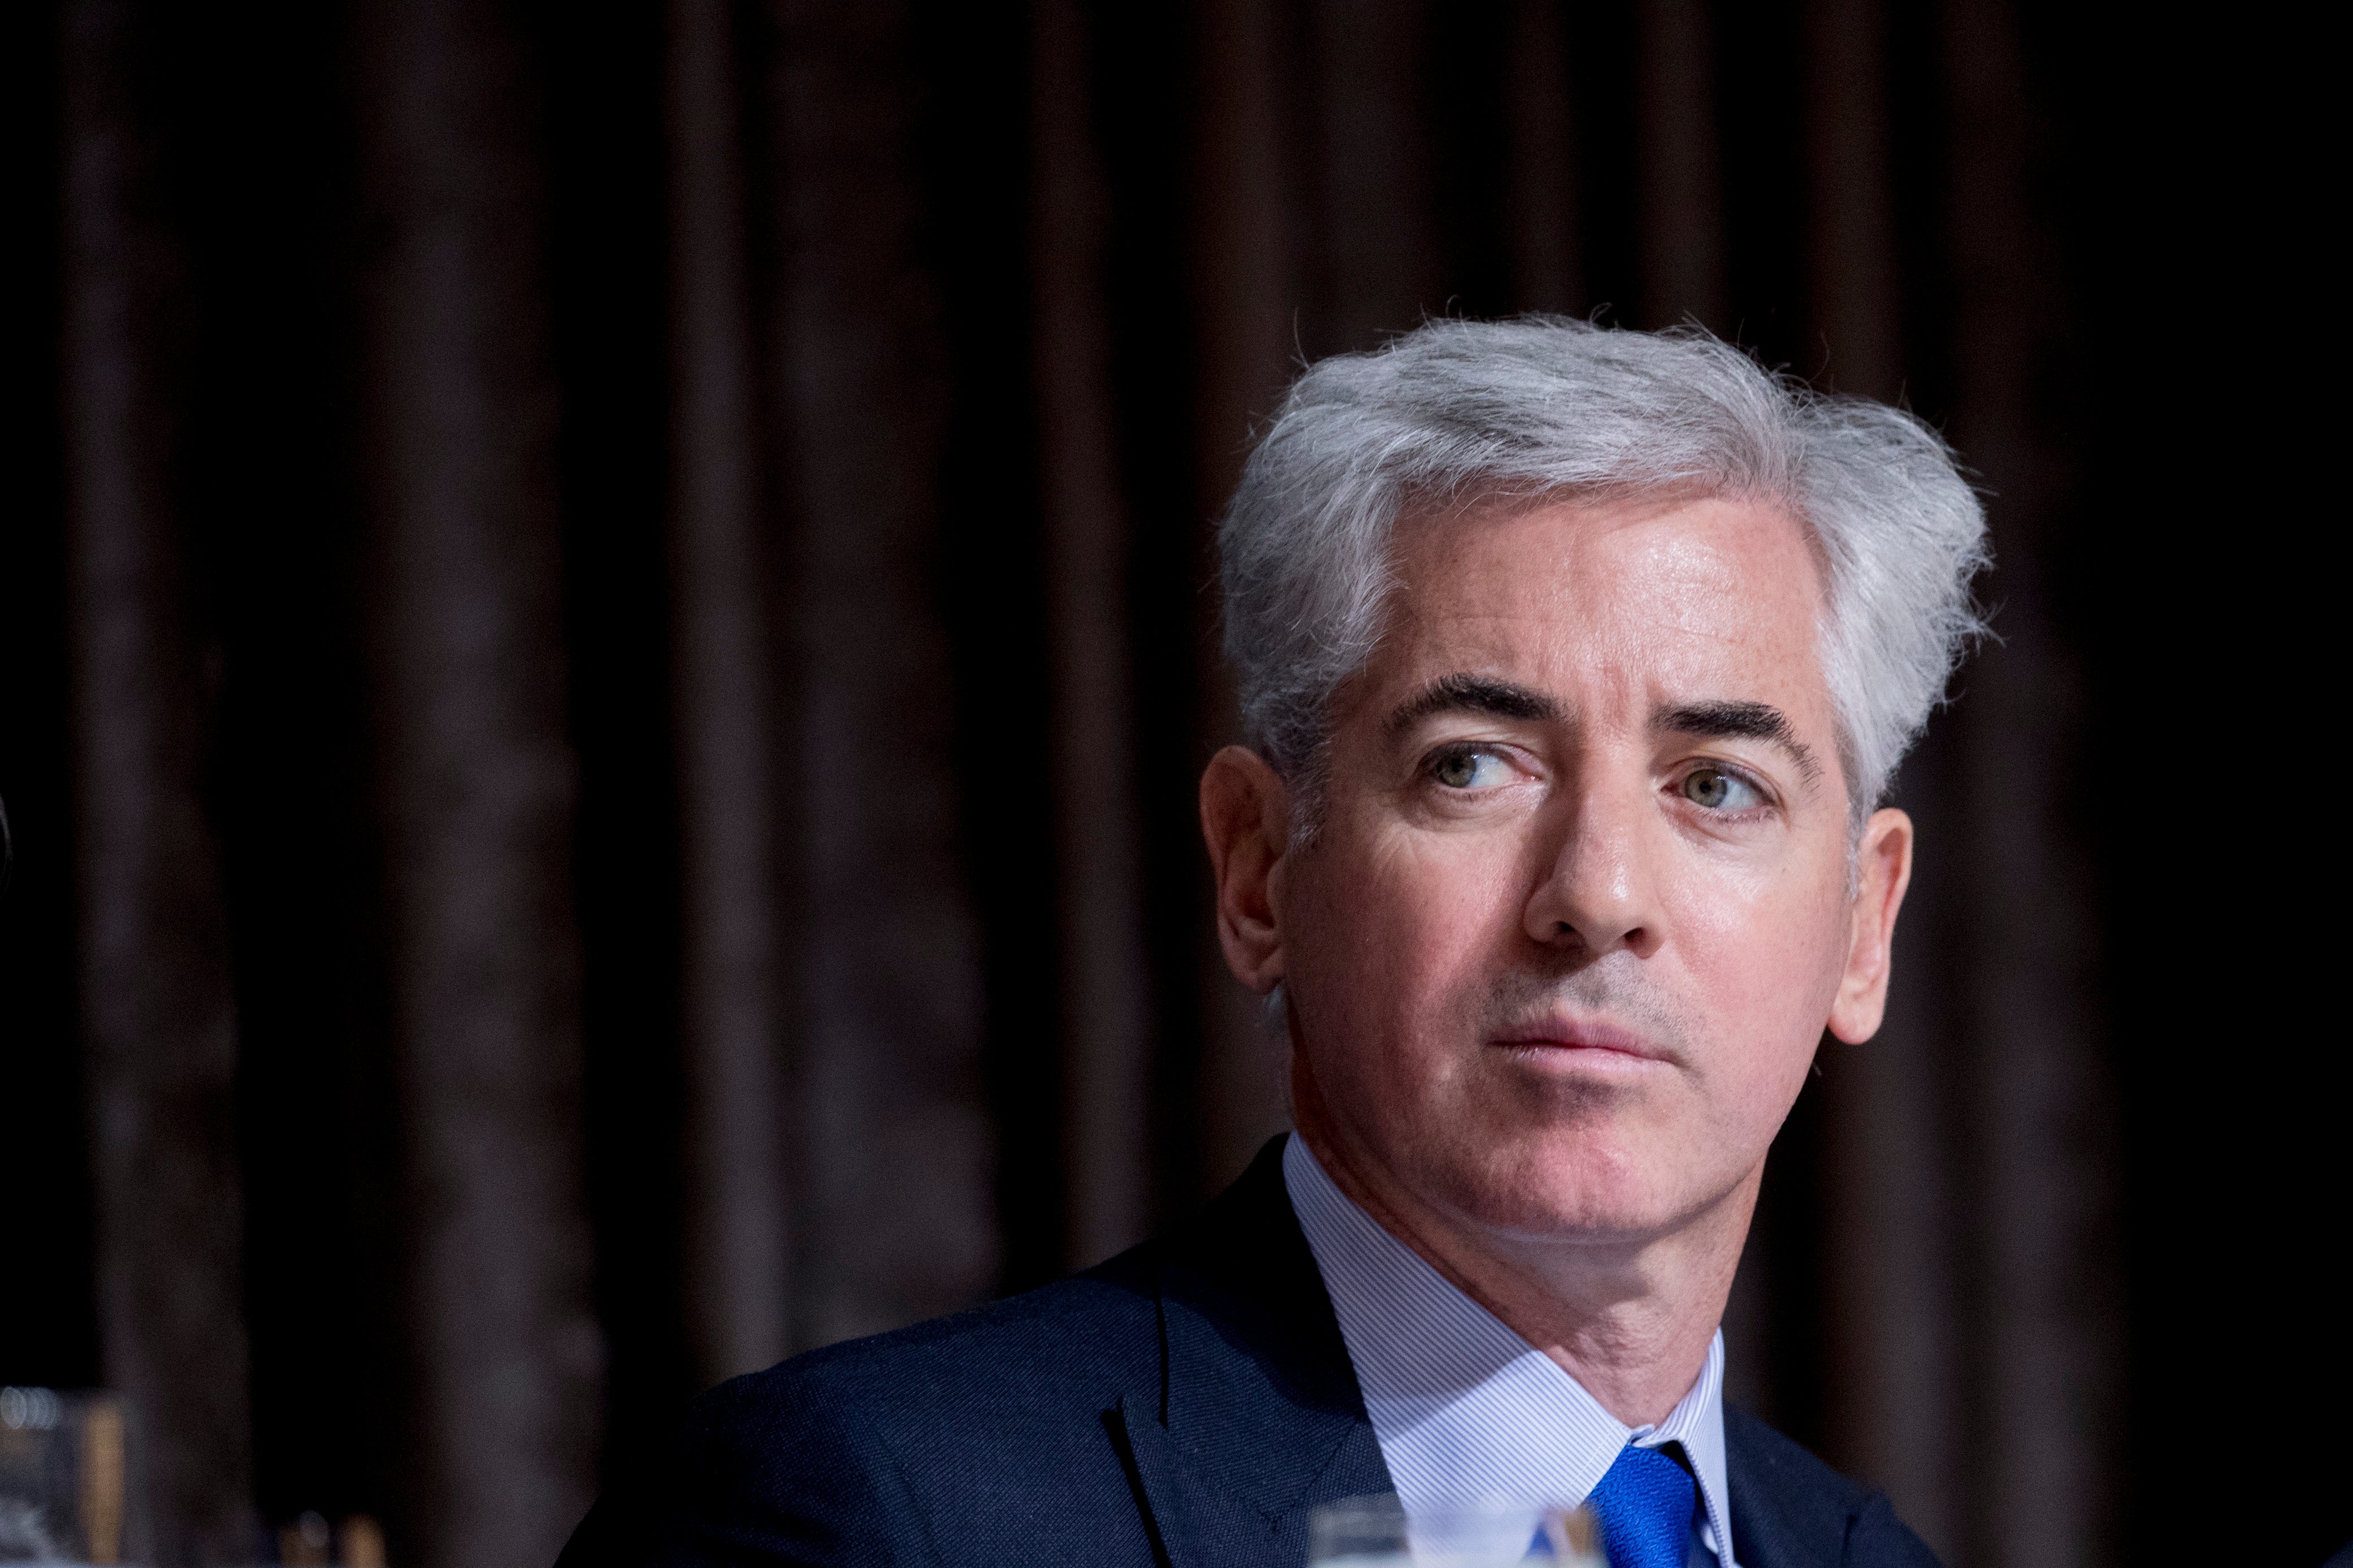 Hedge Fund billionaire Bill Ackman has been a leading critic of university leaders over their handling of campus antisemitism